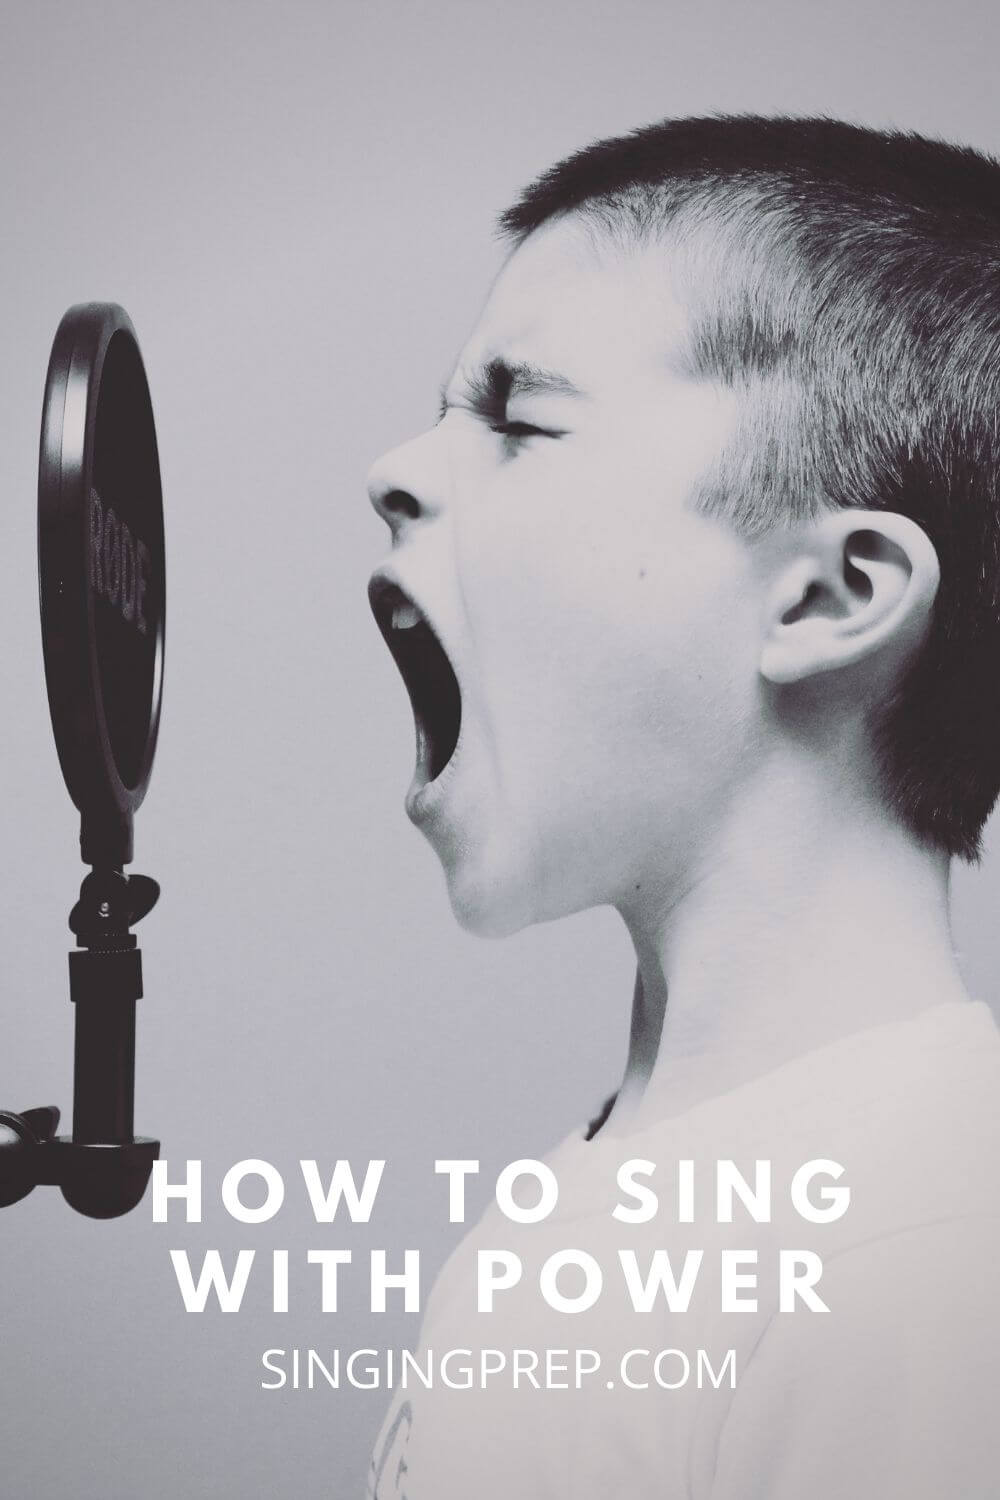 How to Sing with Power pinn